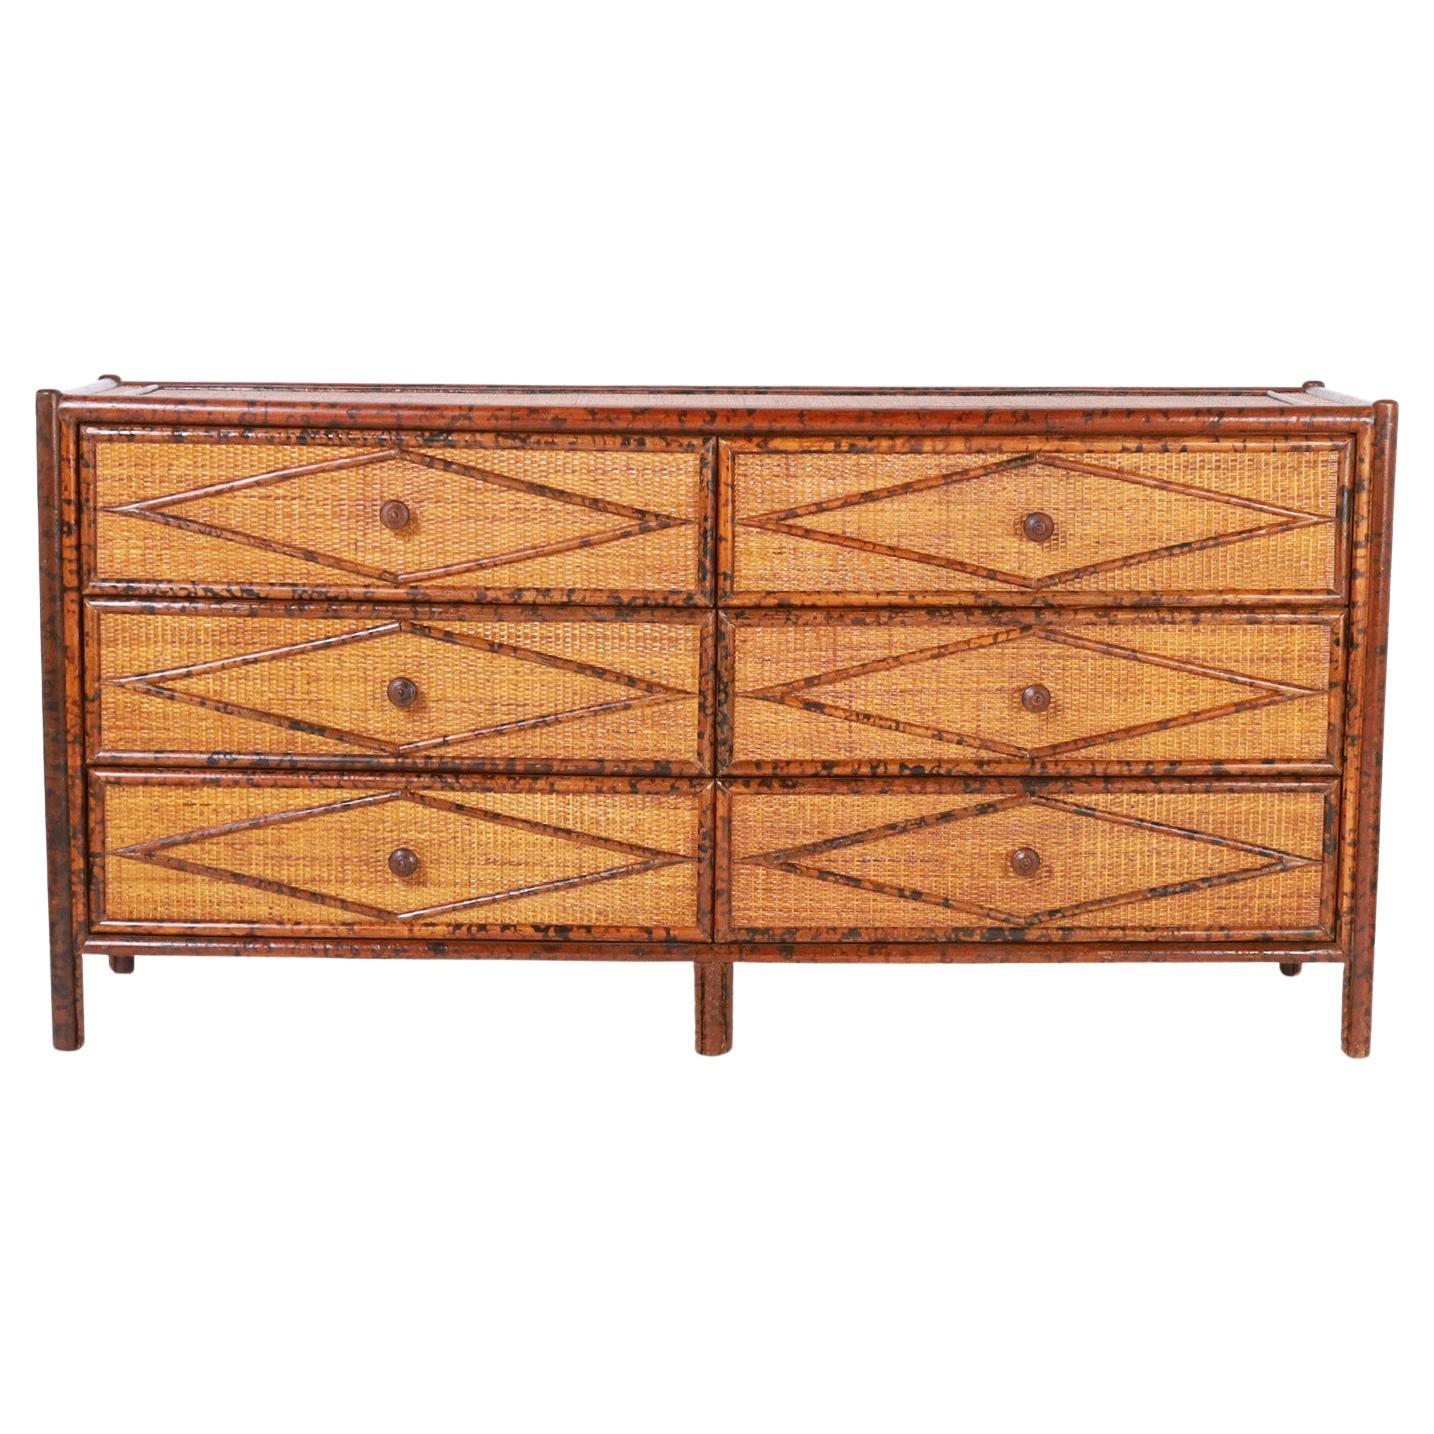 Vintage British Colonial chest of six drawers crafted with a faux bamboo frame having a faux tortoise finish and grasscloth panels all around with applied geometric designs.